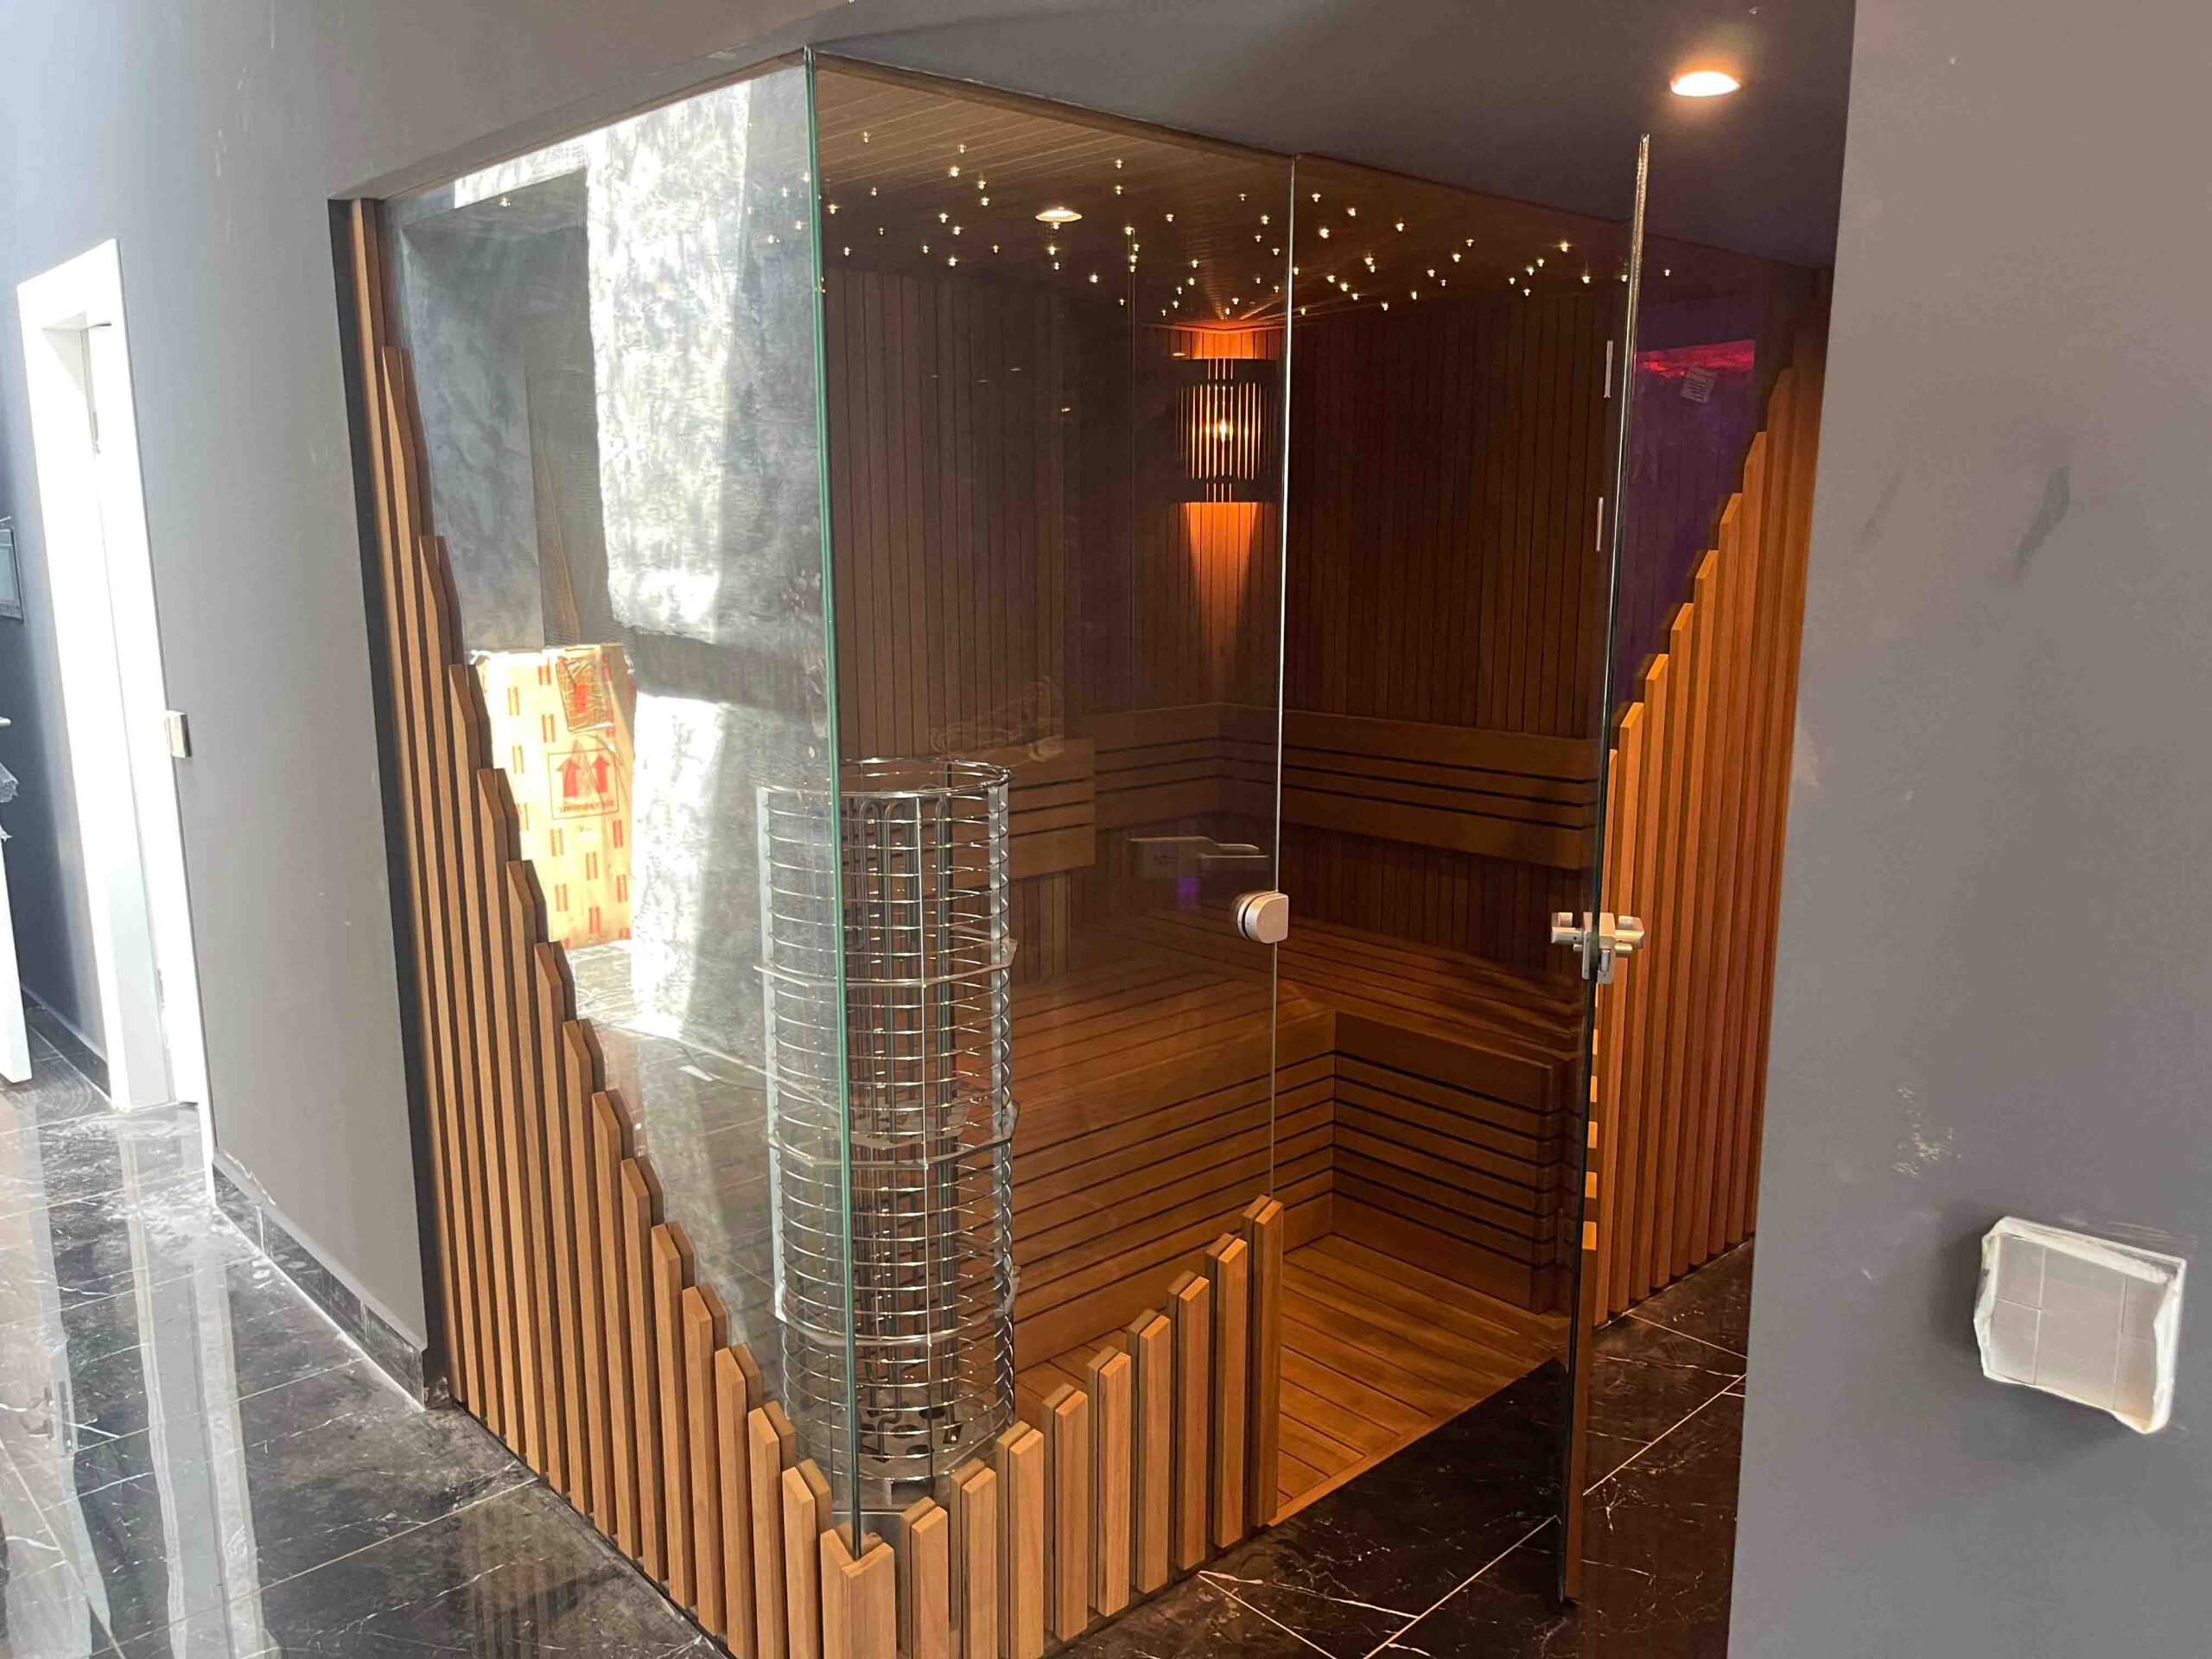 Sauna Dekor's Urban Oasis: Amsterdam Sauna—an architectural jewel seamlessly blending tranquility and sophistication, showcasing Sauna Dekor's mastery in design and construction.